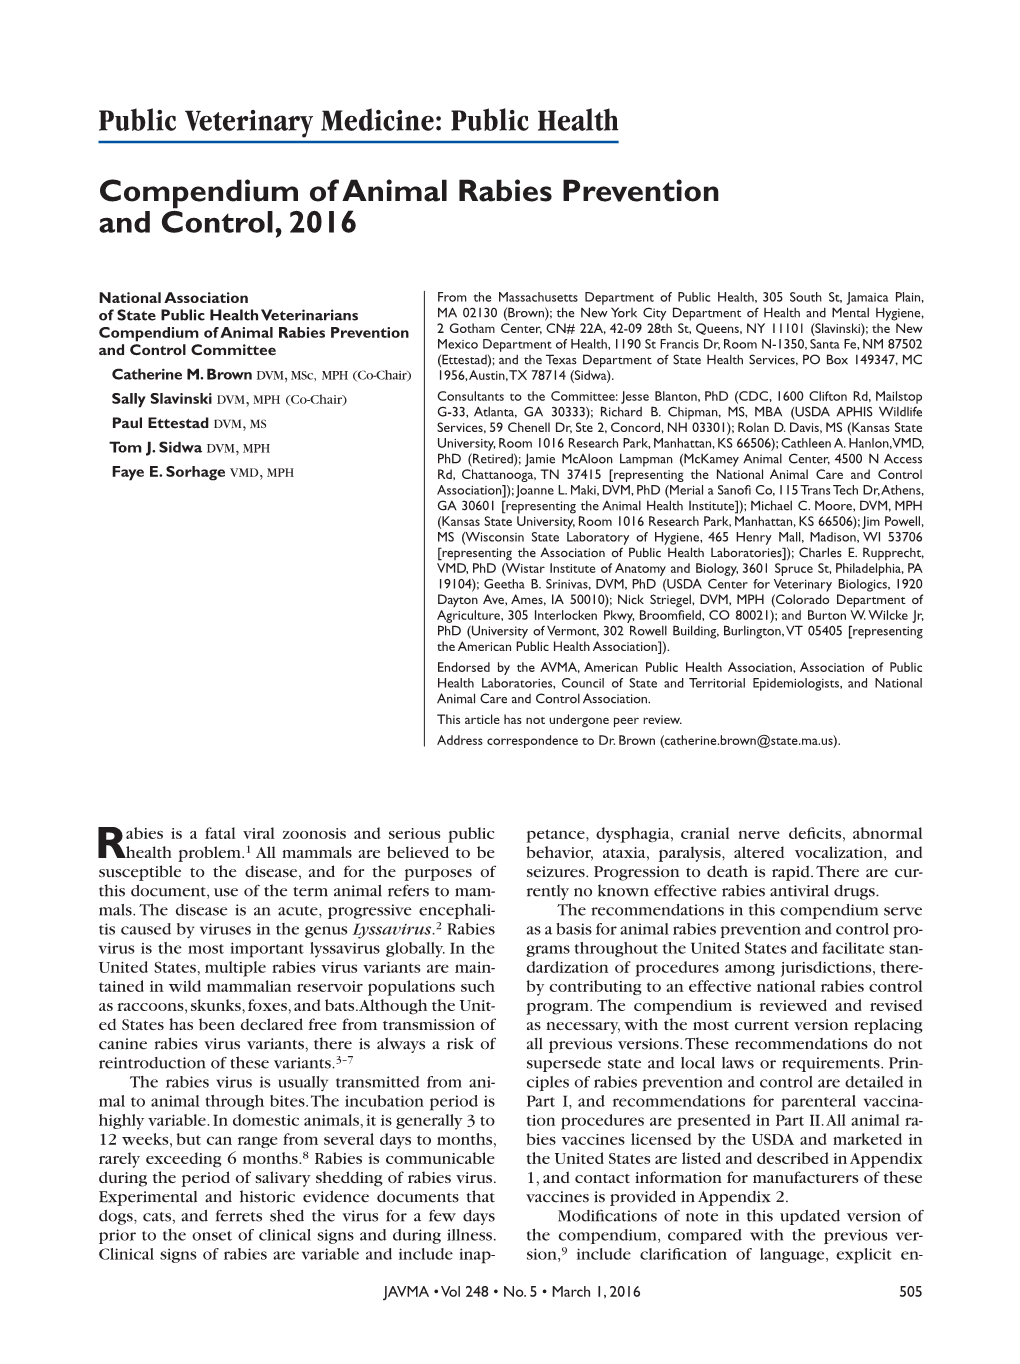 Compendium of Animal Rabies Prevention and Control, 2016